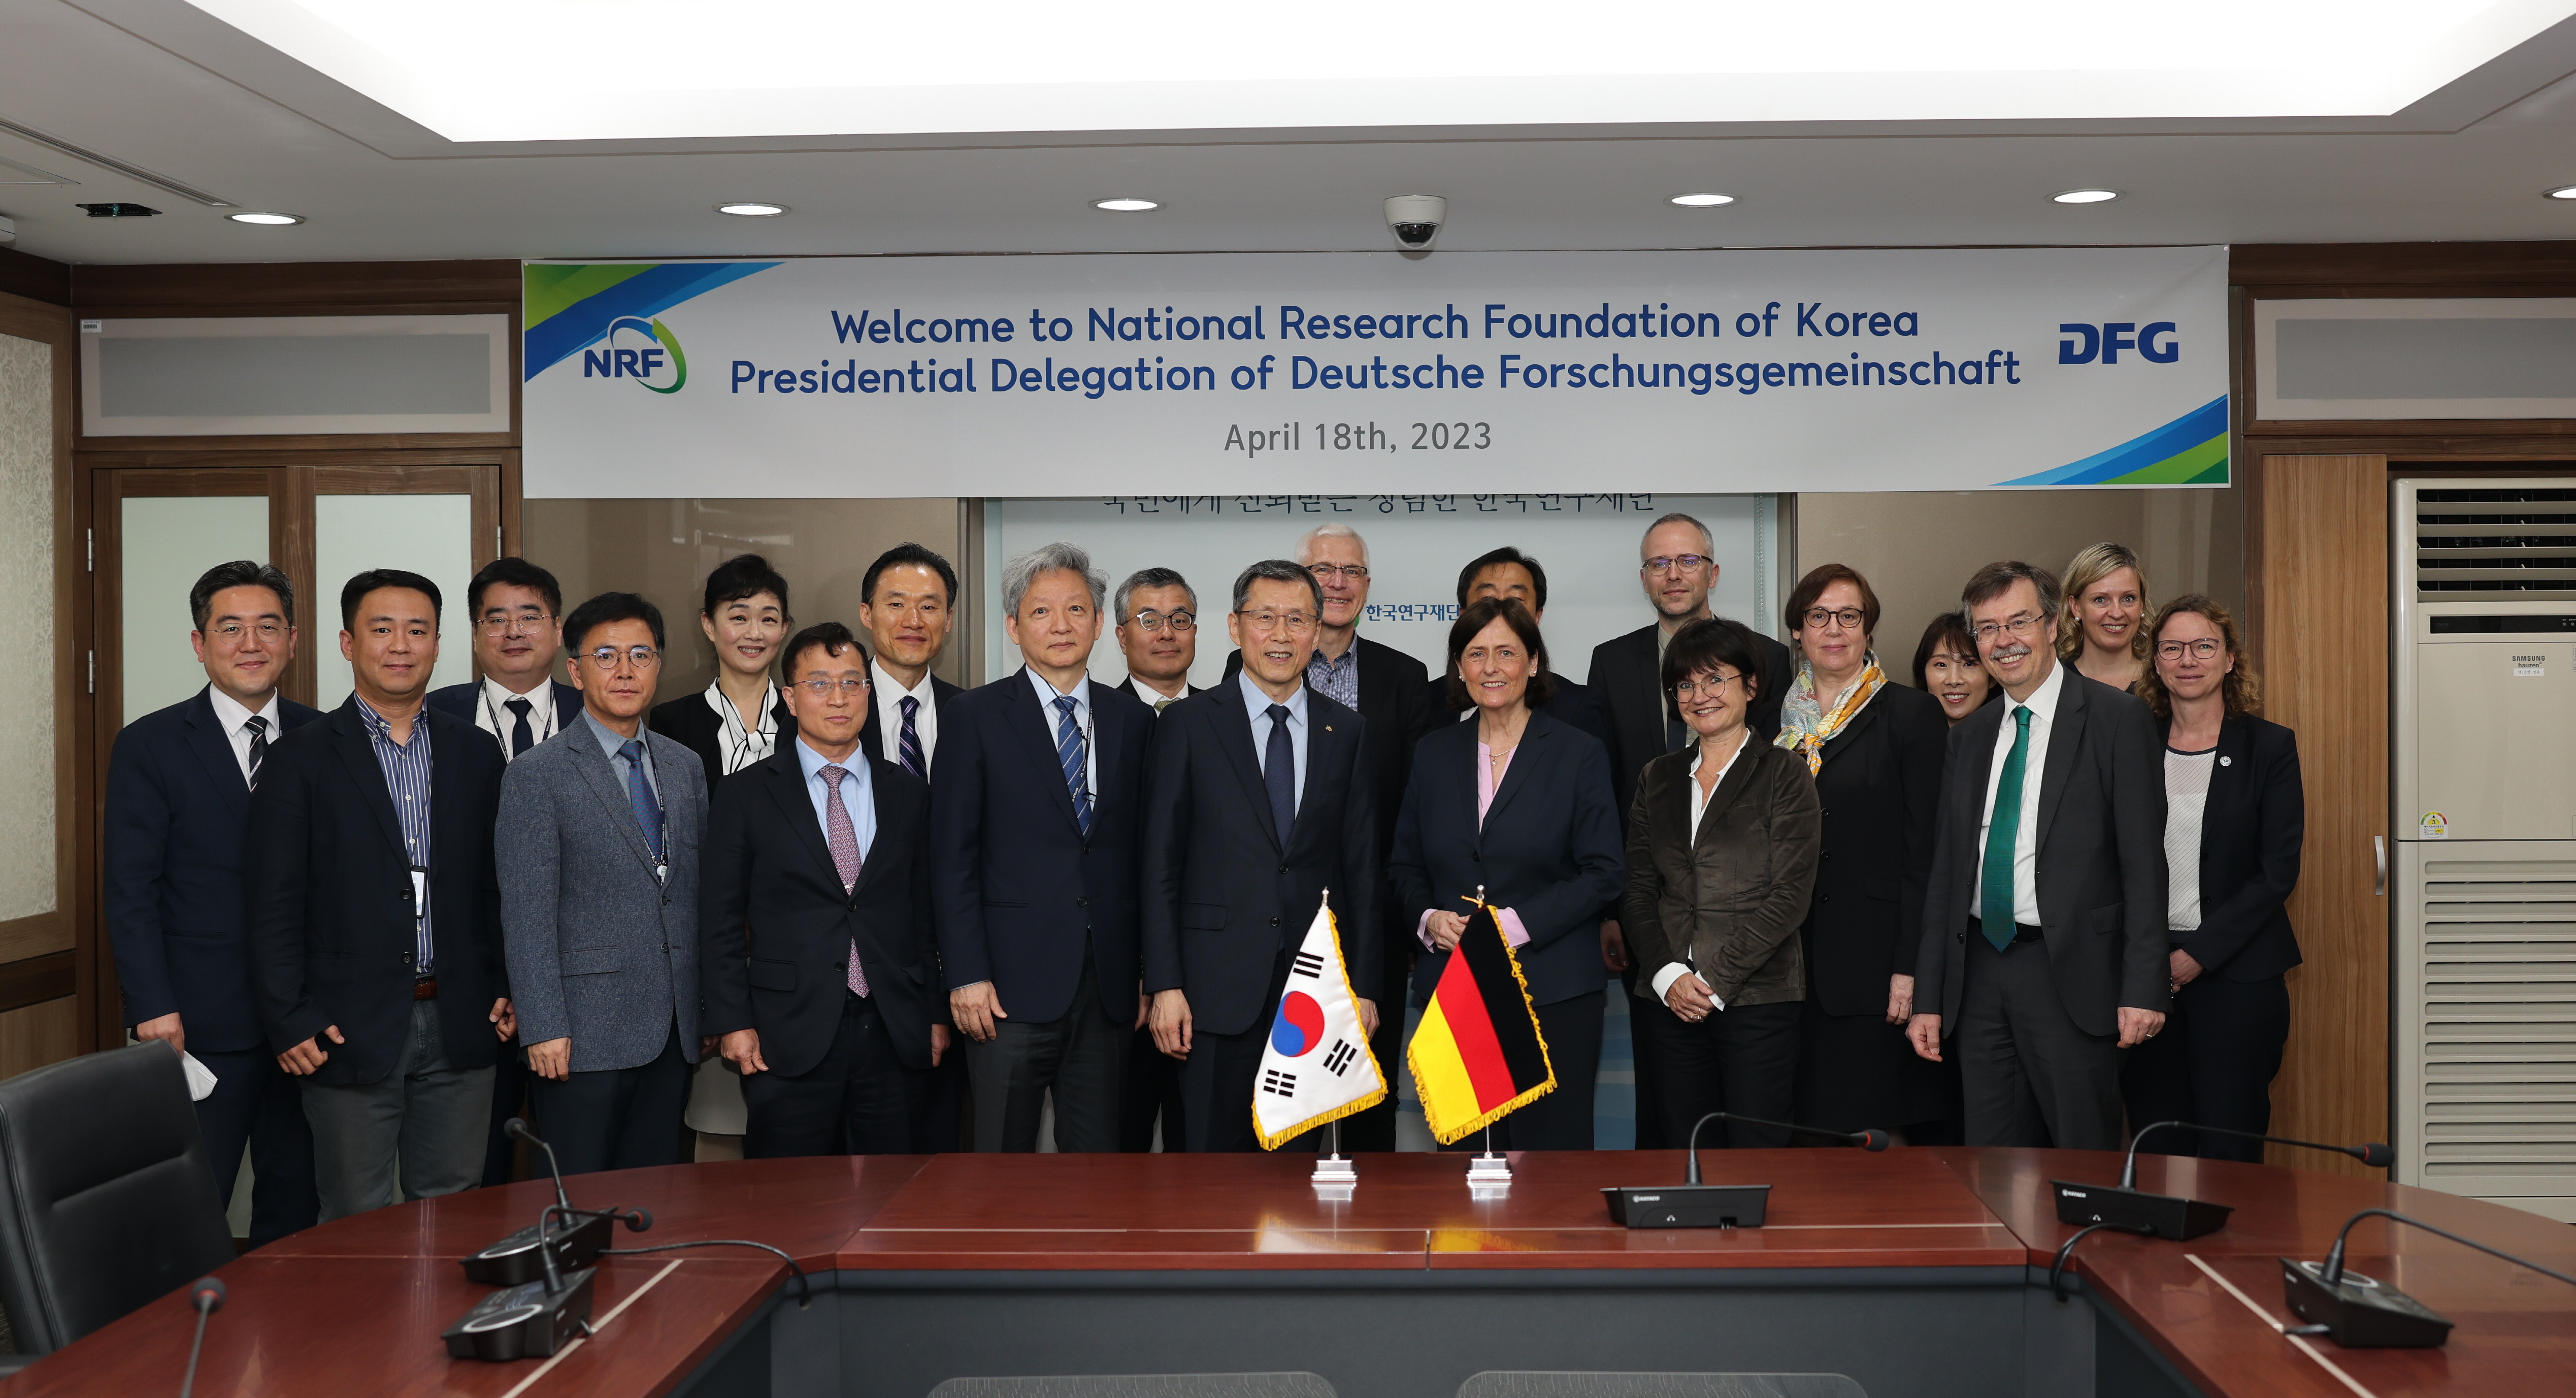 National Research Foundation of Korea, Daejeon: NRF President Prof. Kwang Bok Lee, the participating NRF representatives, the DFG delegation and two members from the German Embassy